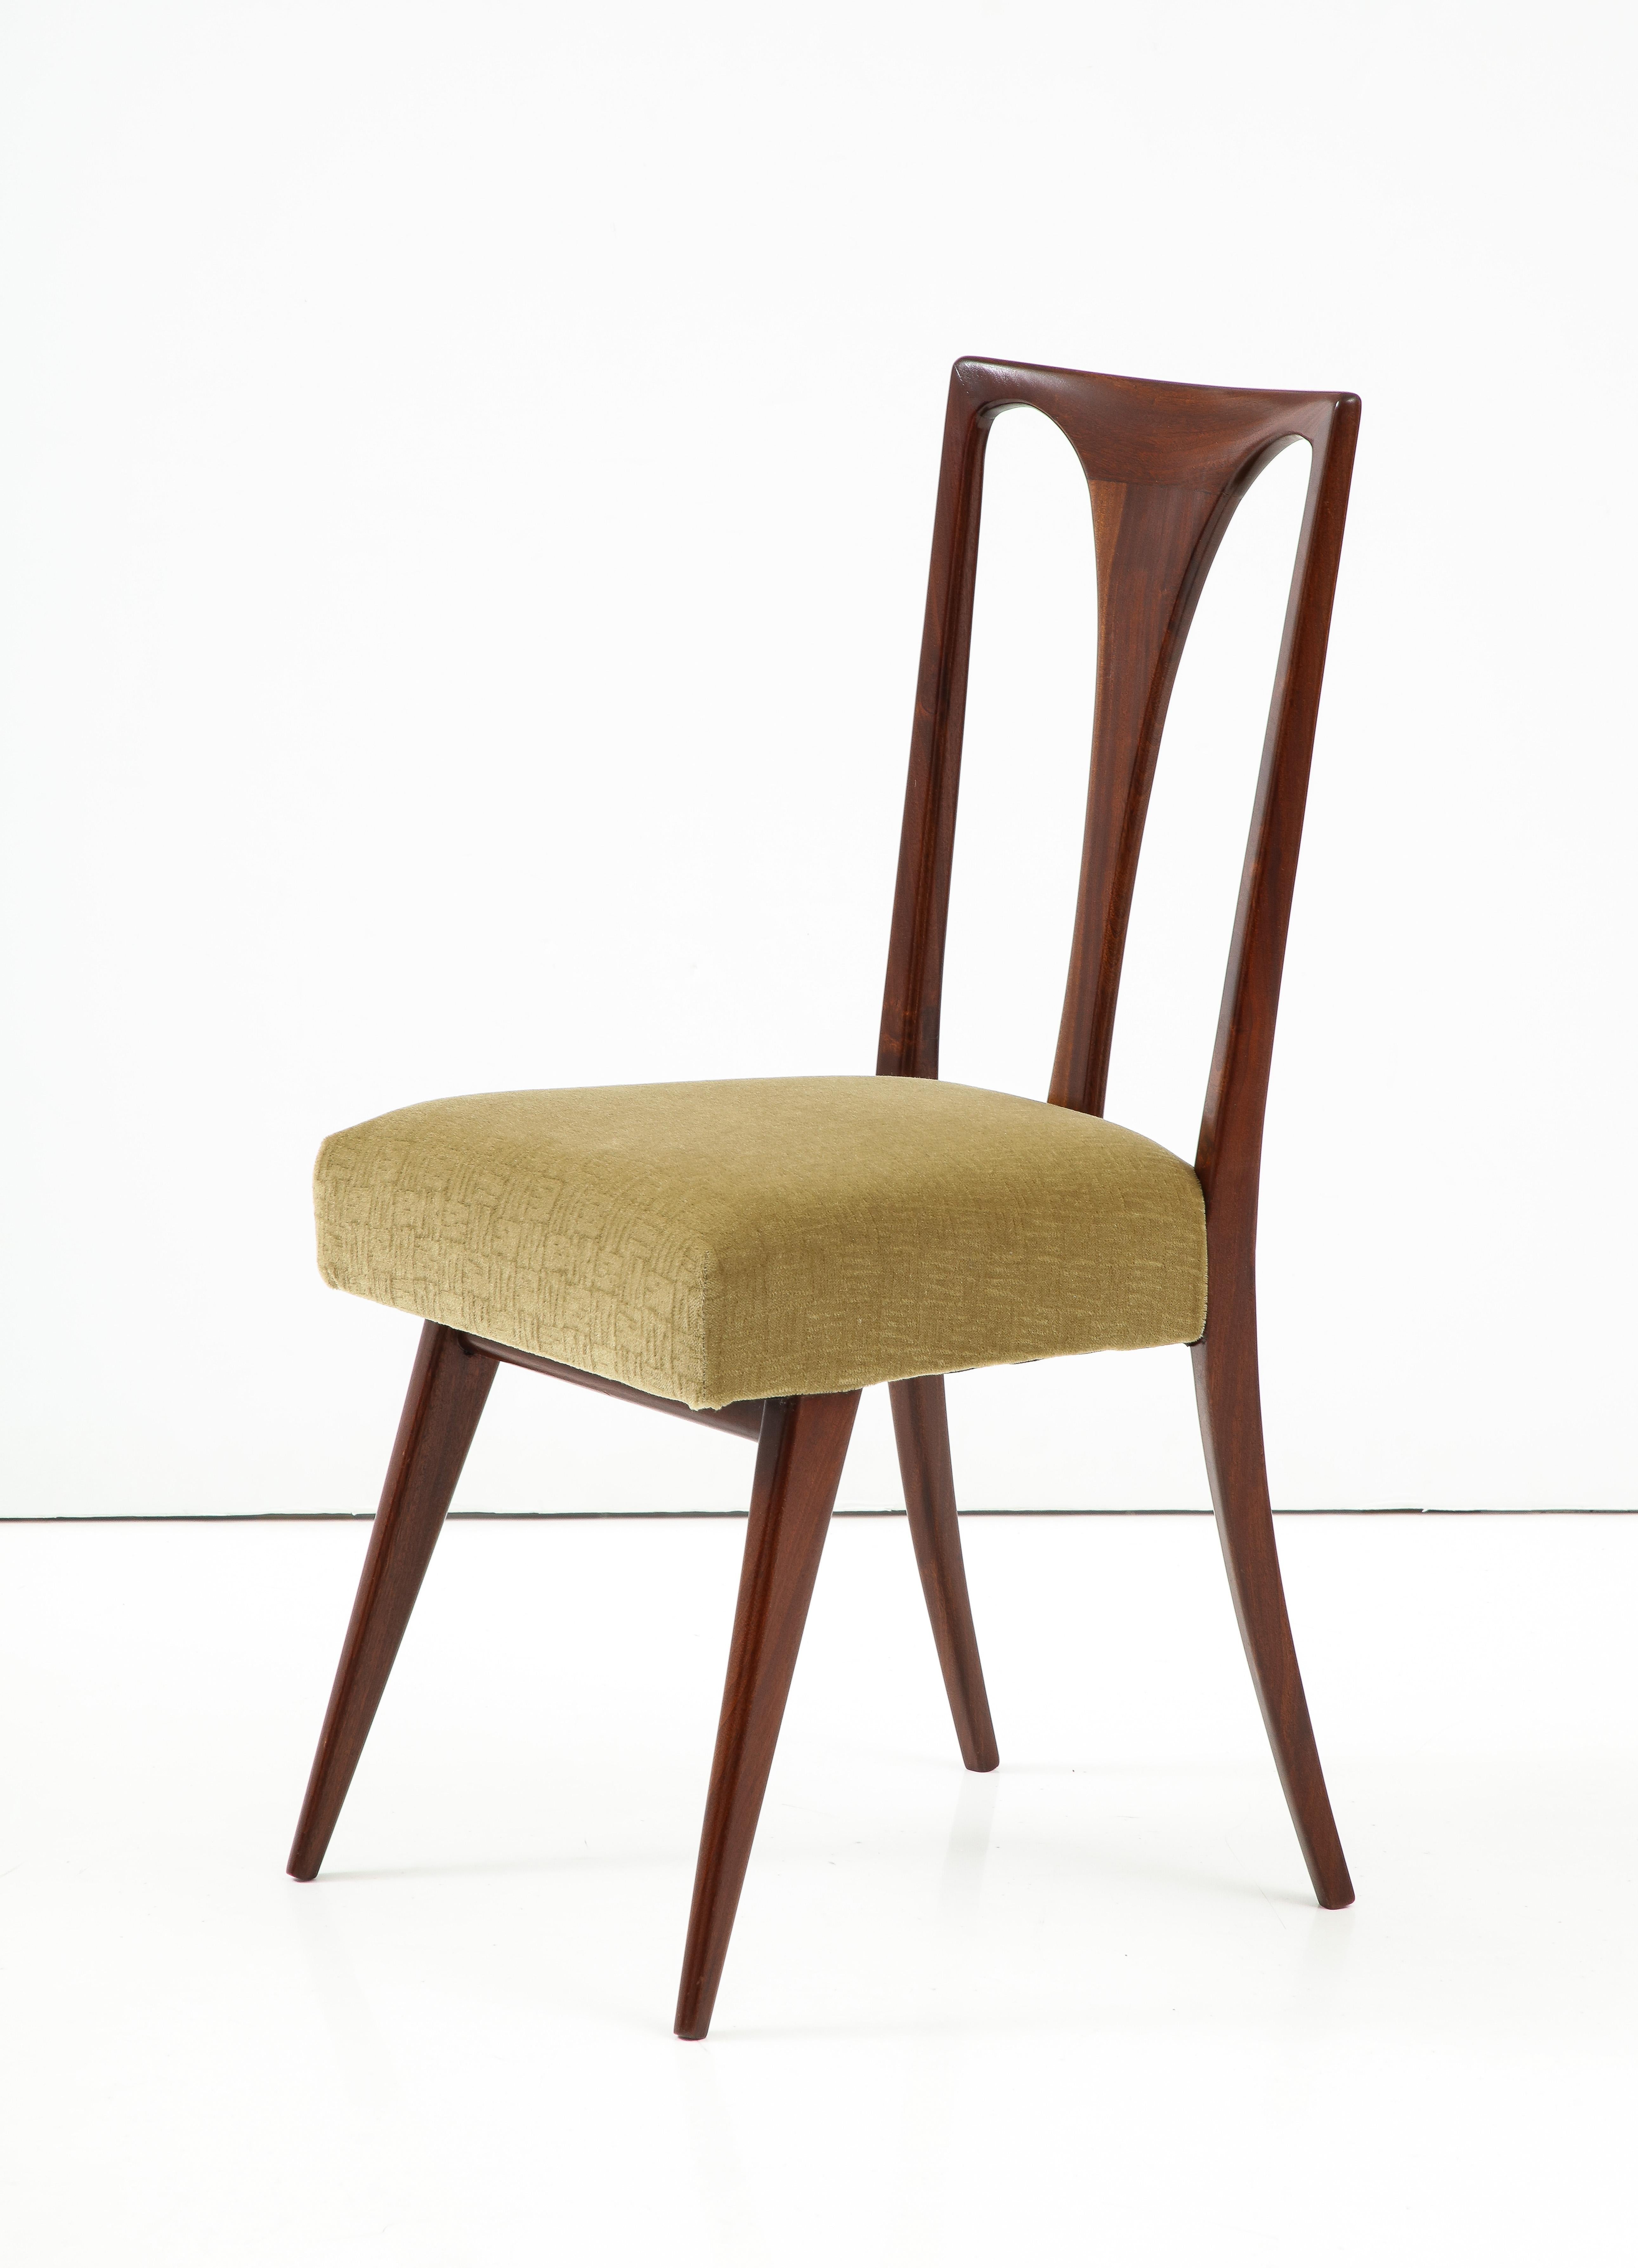 1960's mid-century modern Italian dining chairs made of walnut and mahogany with Mohair upholstery in the style of Carlo De Carli, fully restored and re-upholstered in Donghia Mohair fabric, with minor wear and patina due to age and use.